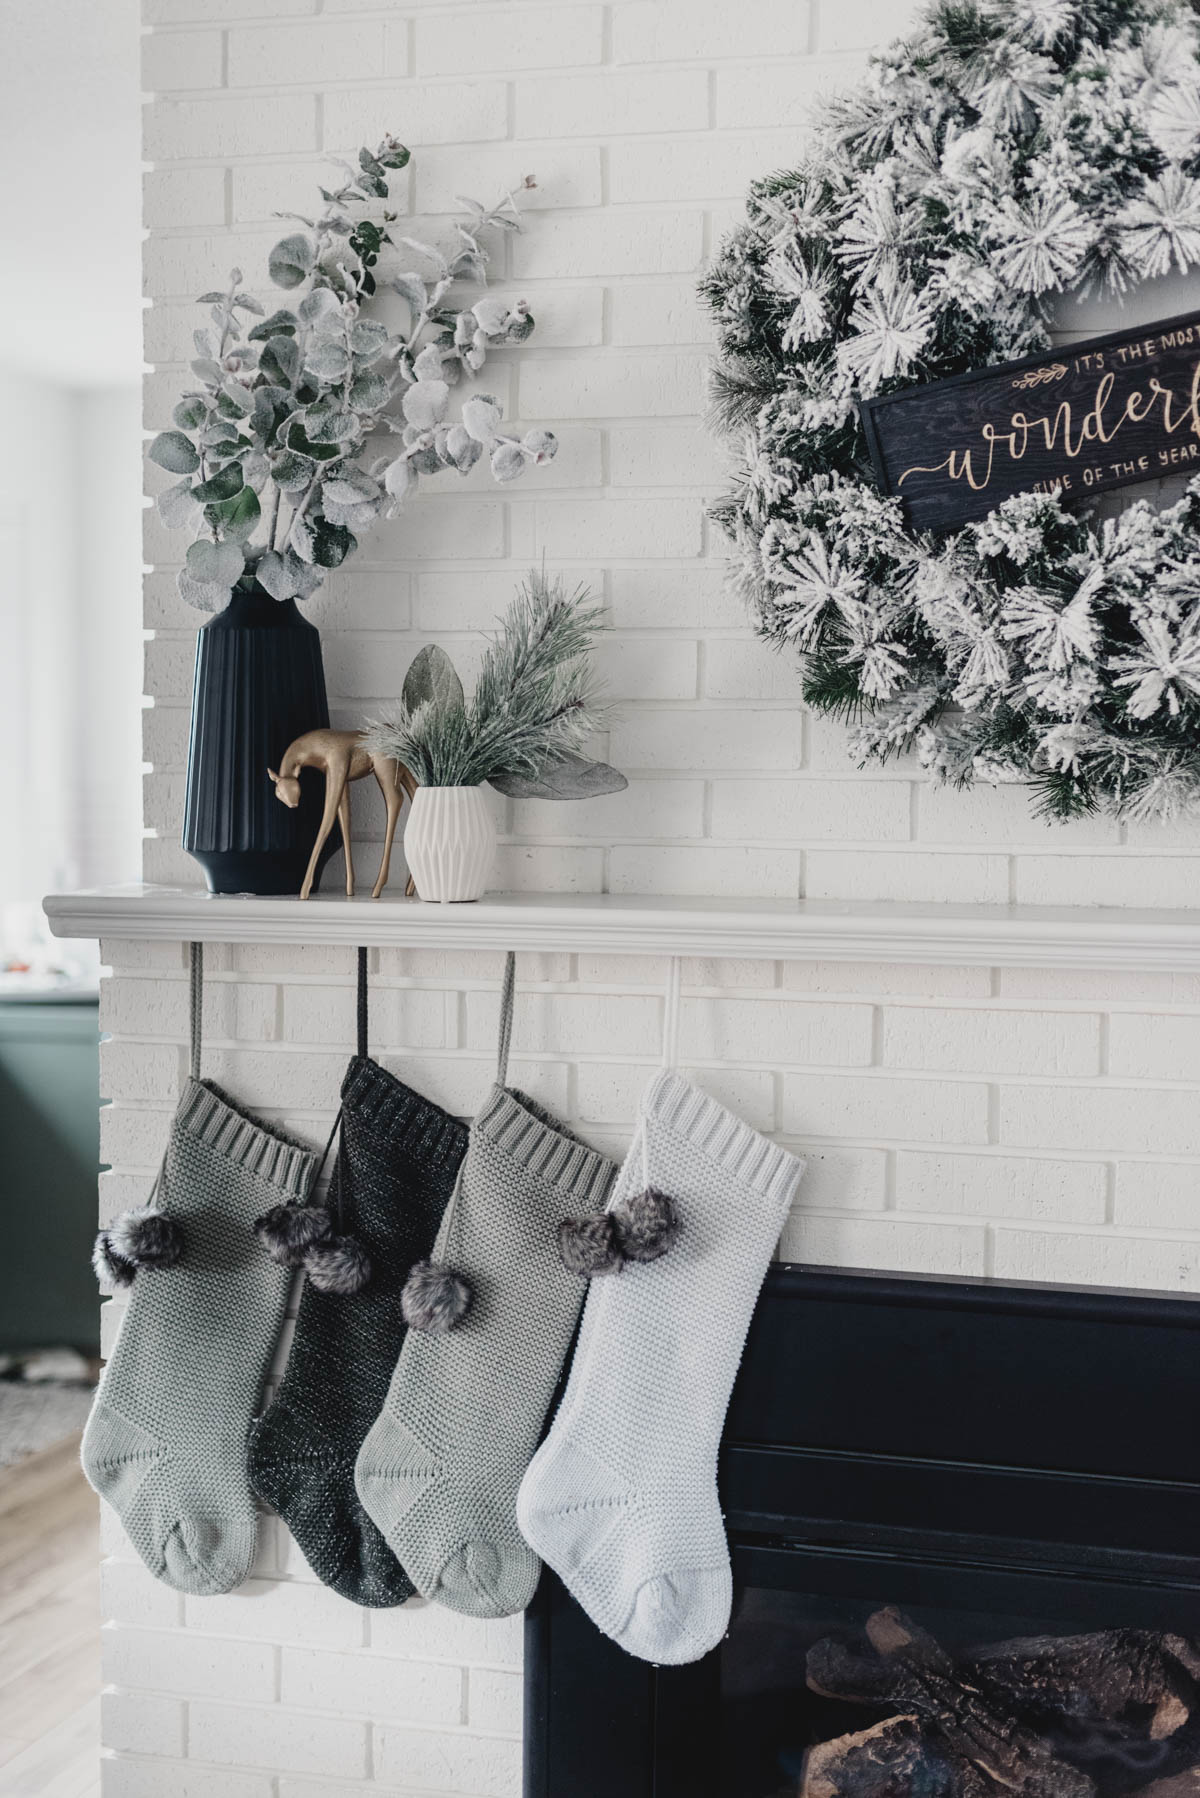 Modern holiday mantel with flocked greenery, black and white! And a letterboard ;)